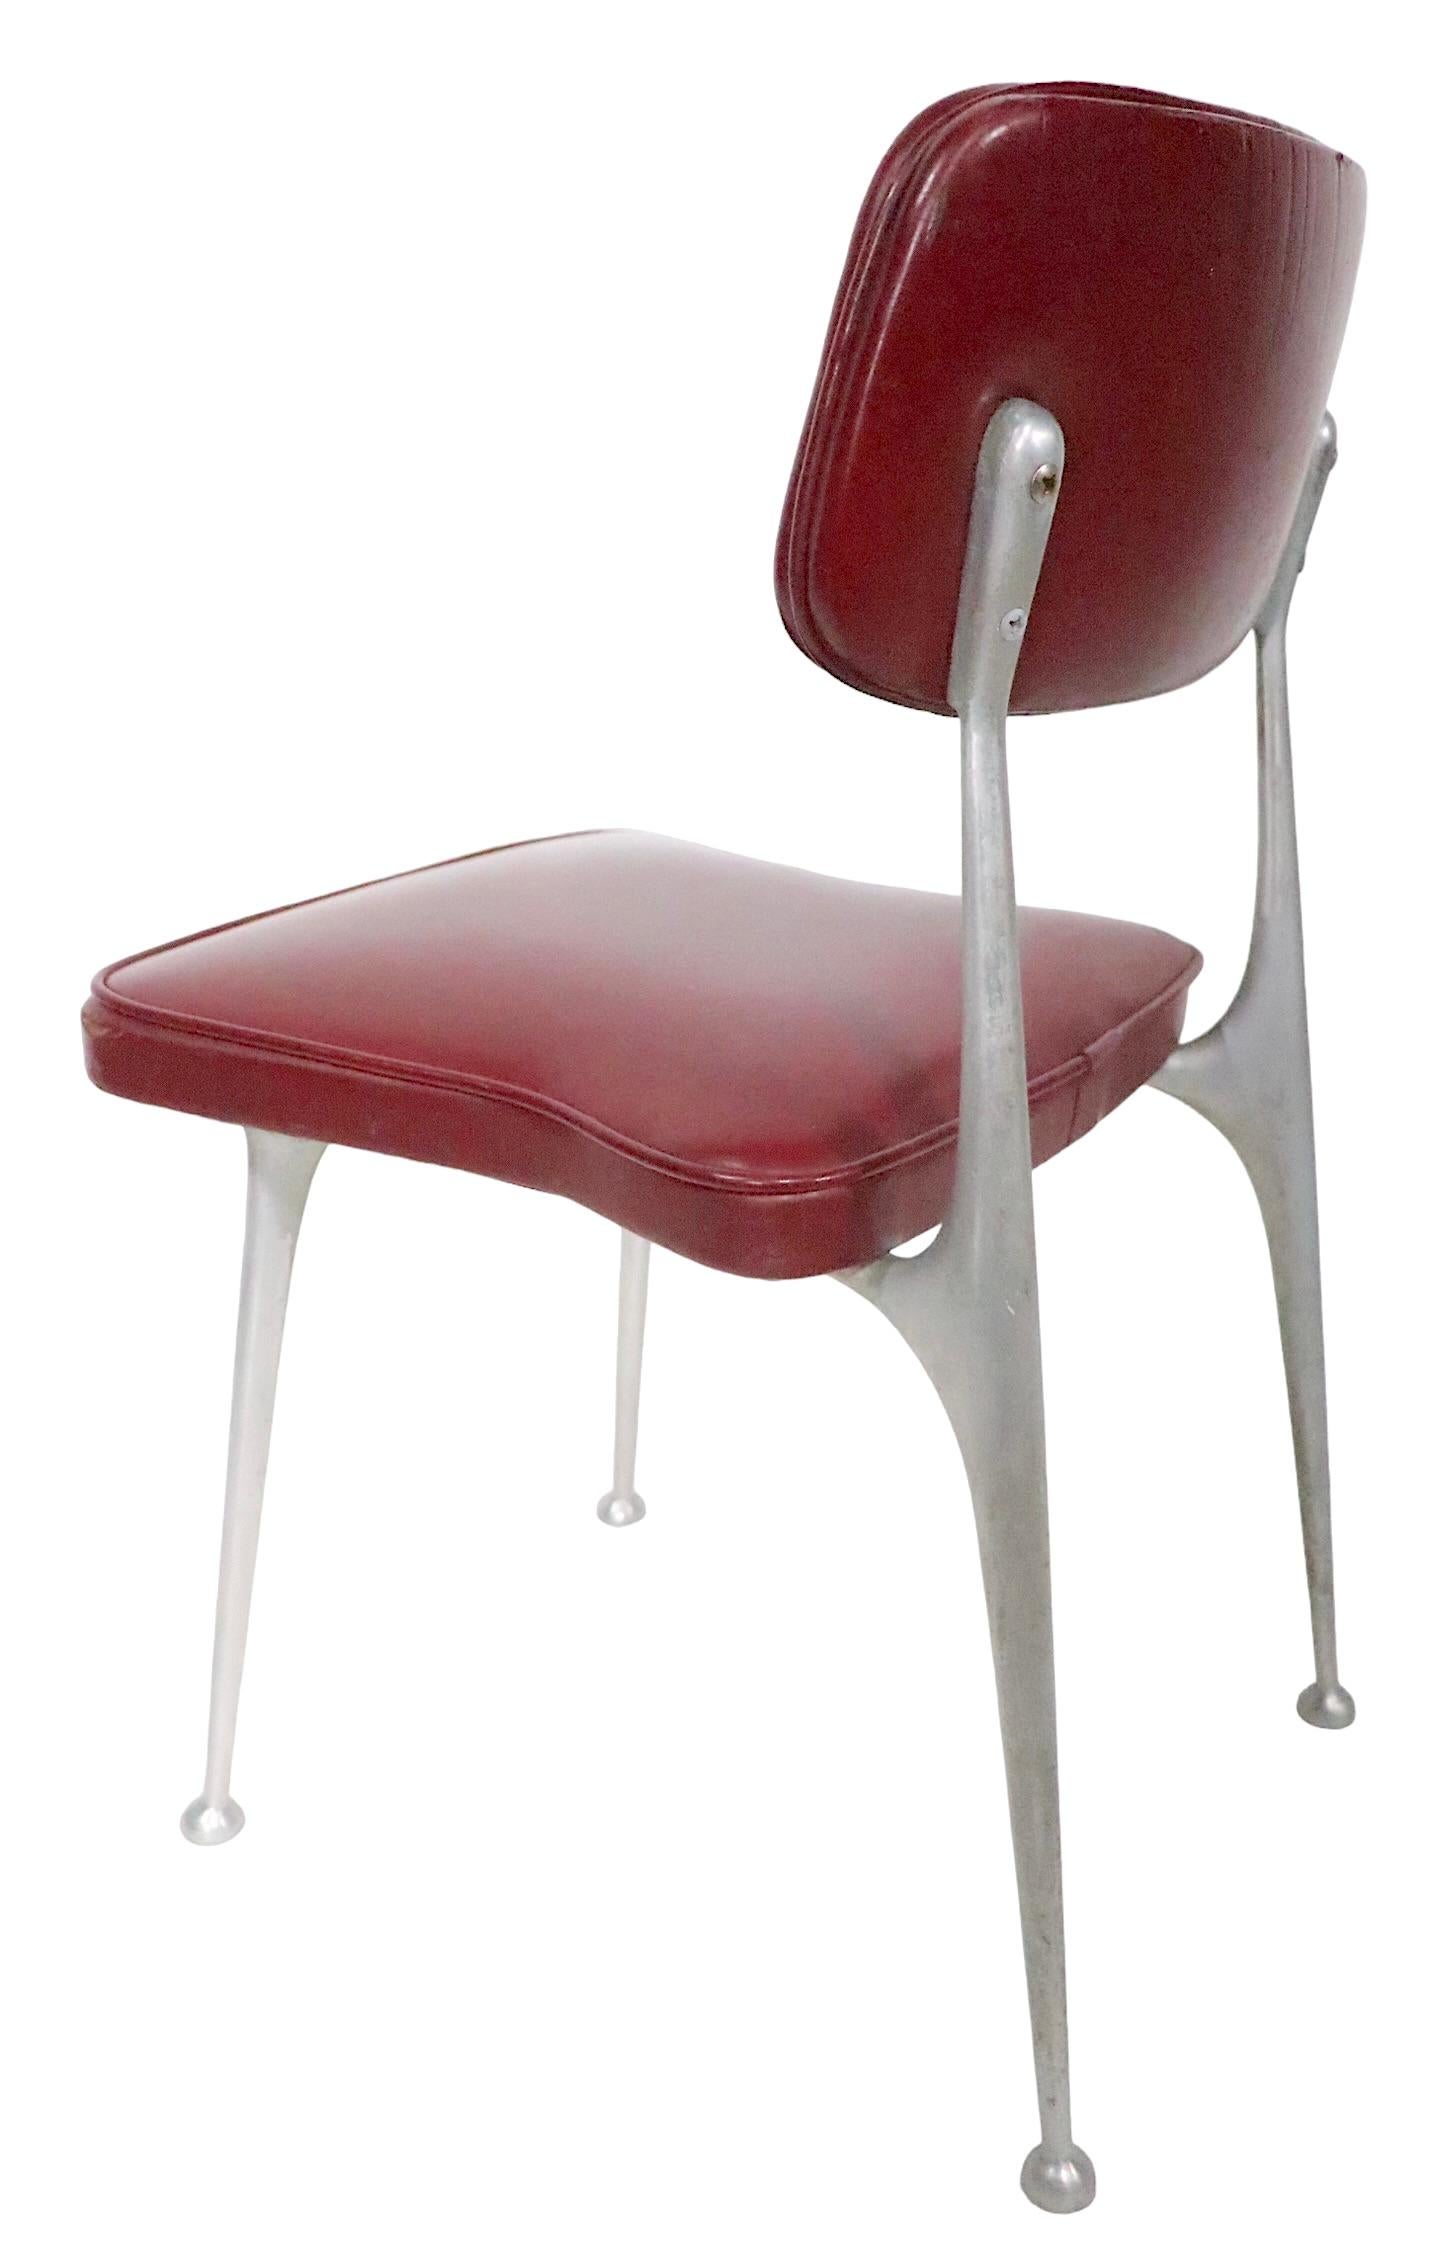 American Shelby Williams Gazelle Cast Aluminum and Vinyl Chair, circa 1960s For Sale